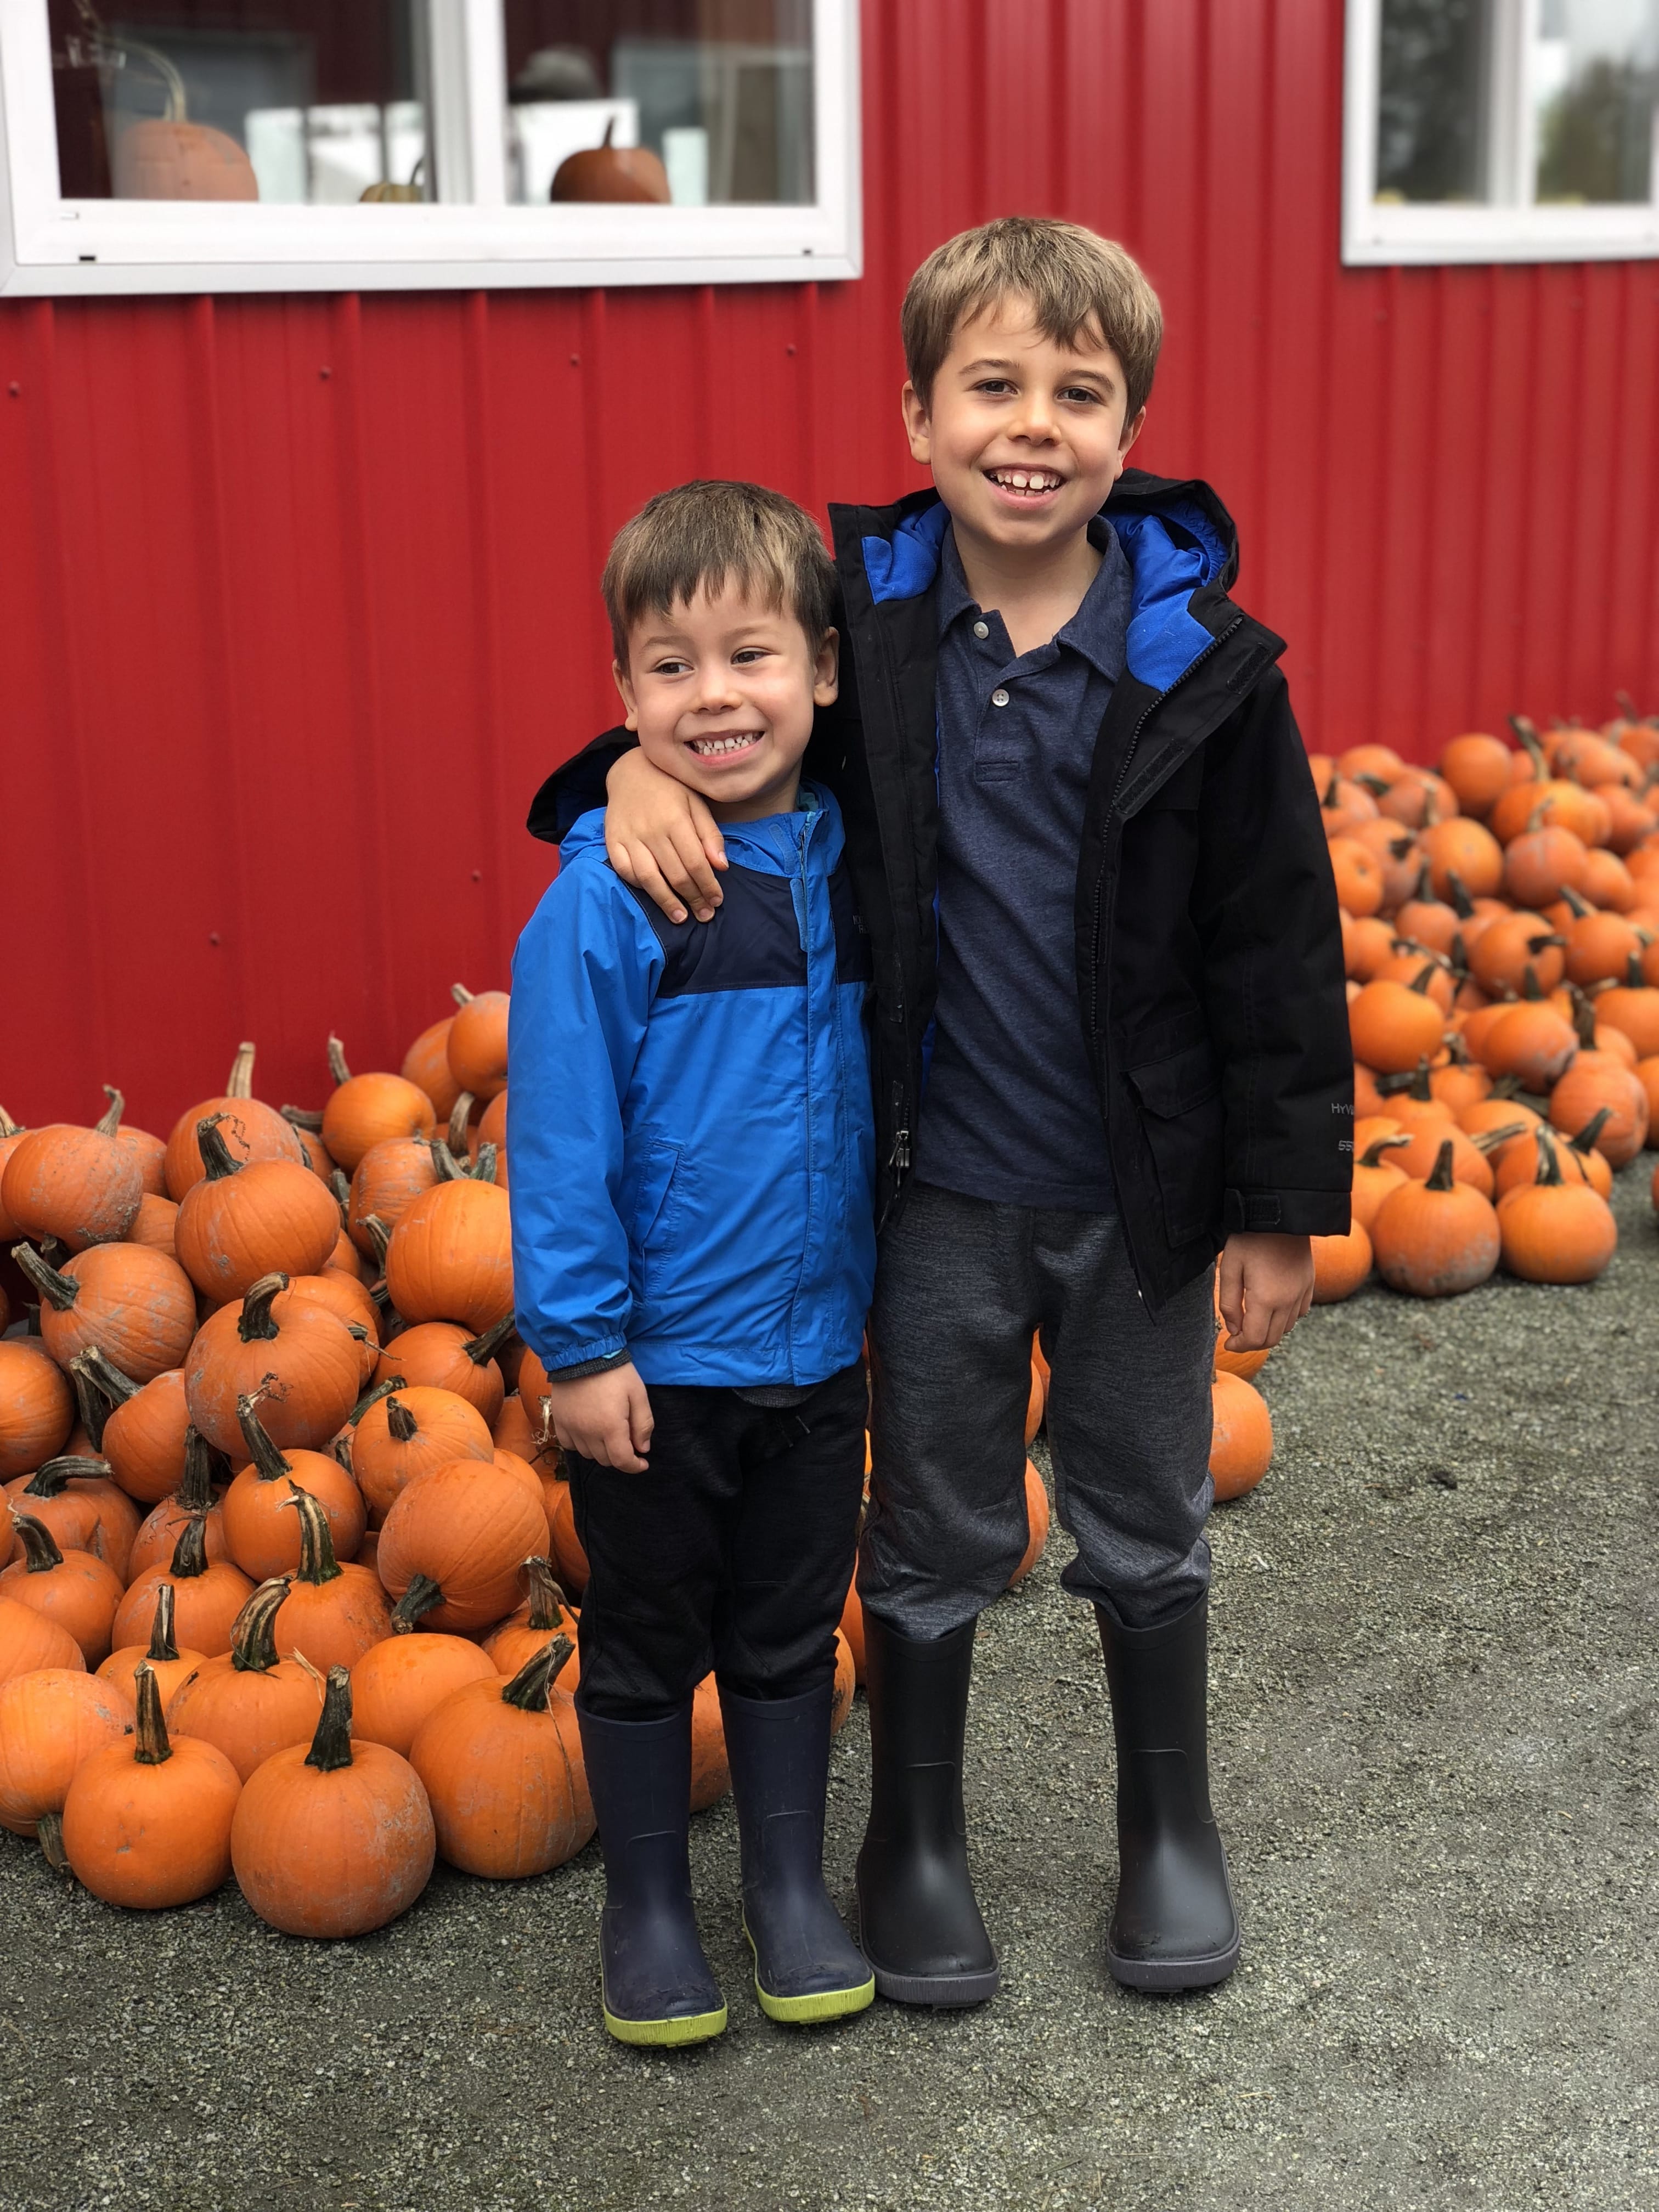 Our Yearly Visit to the Laity Pumpkin Patch in Maple Ridge, BC